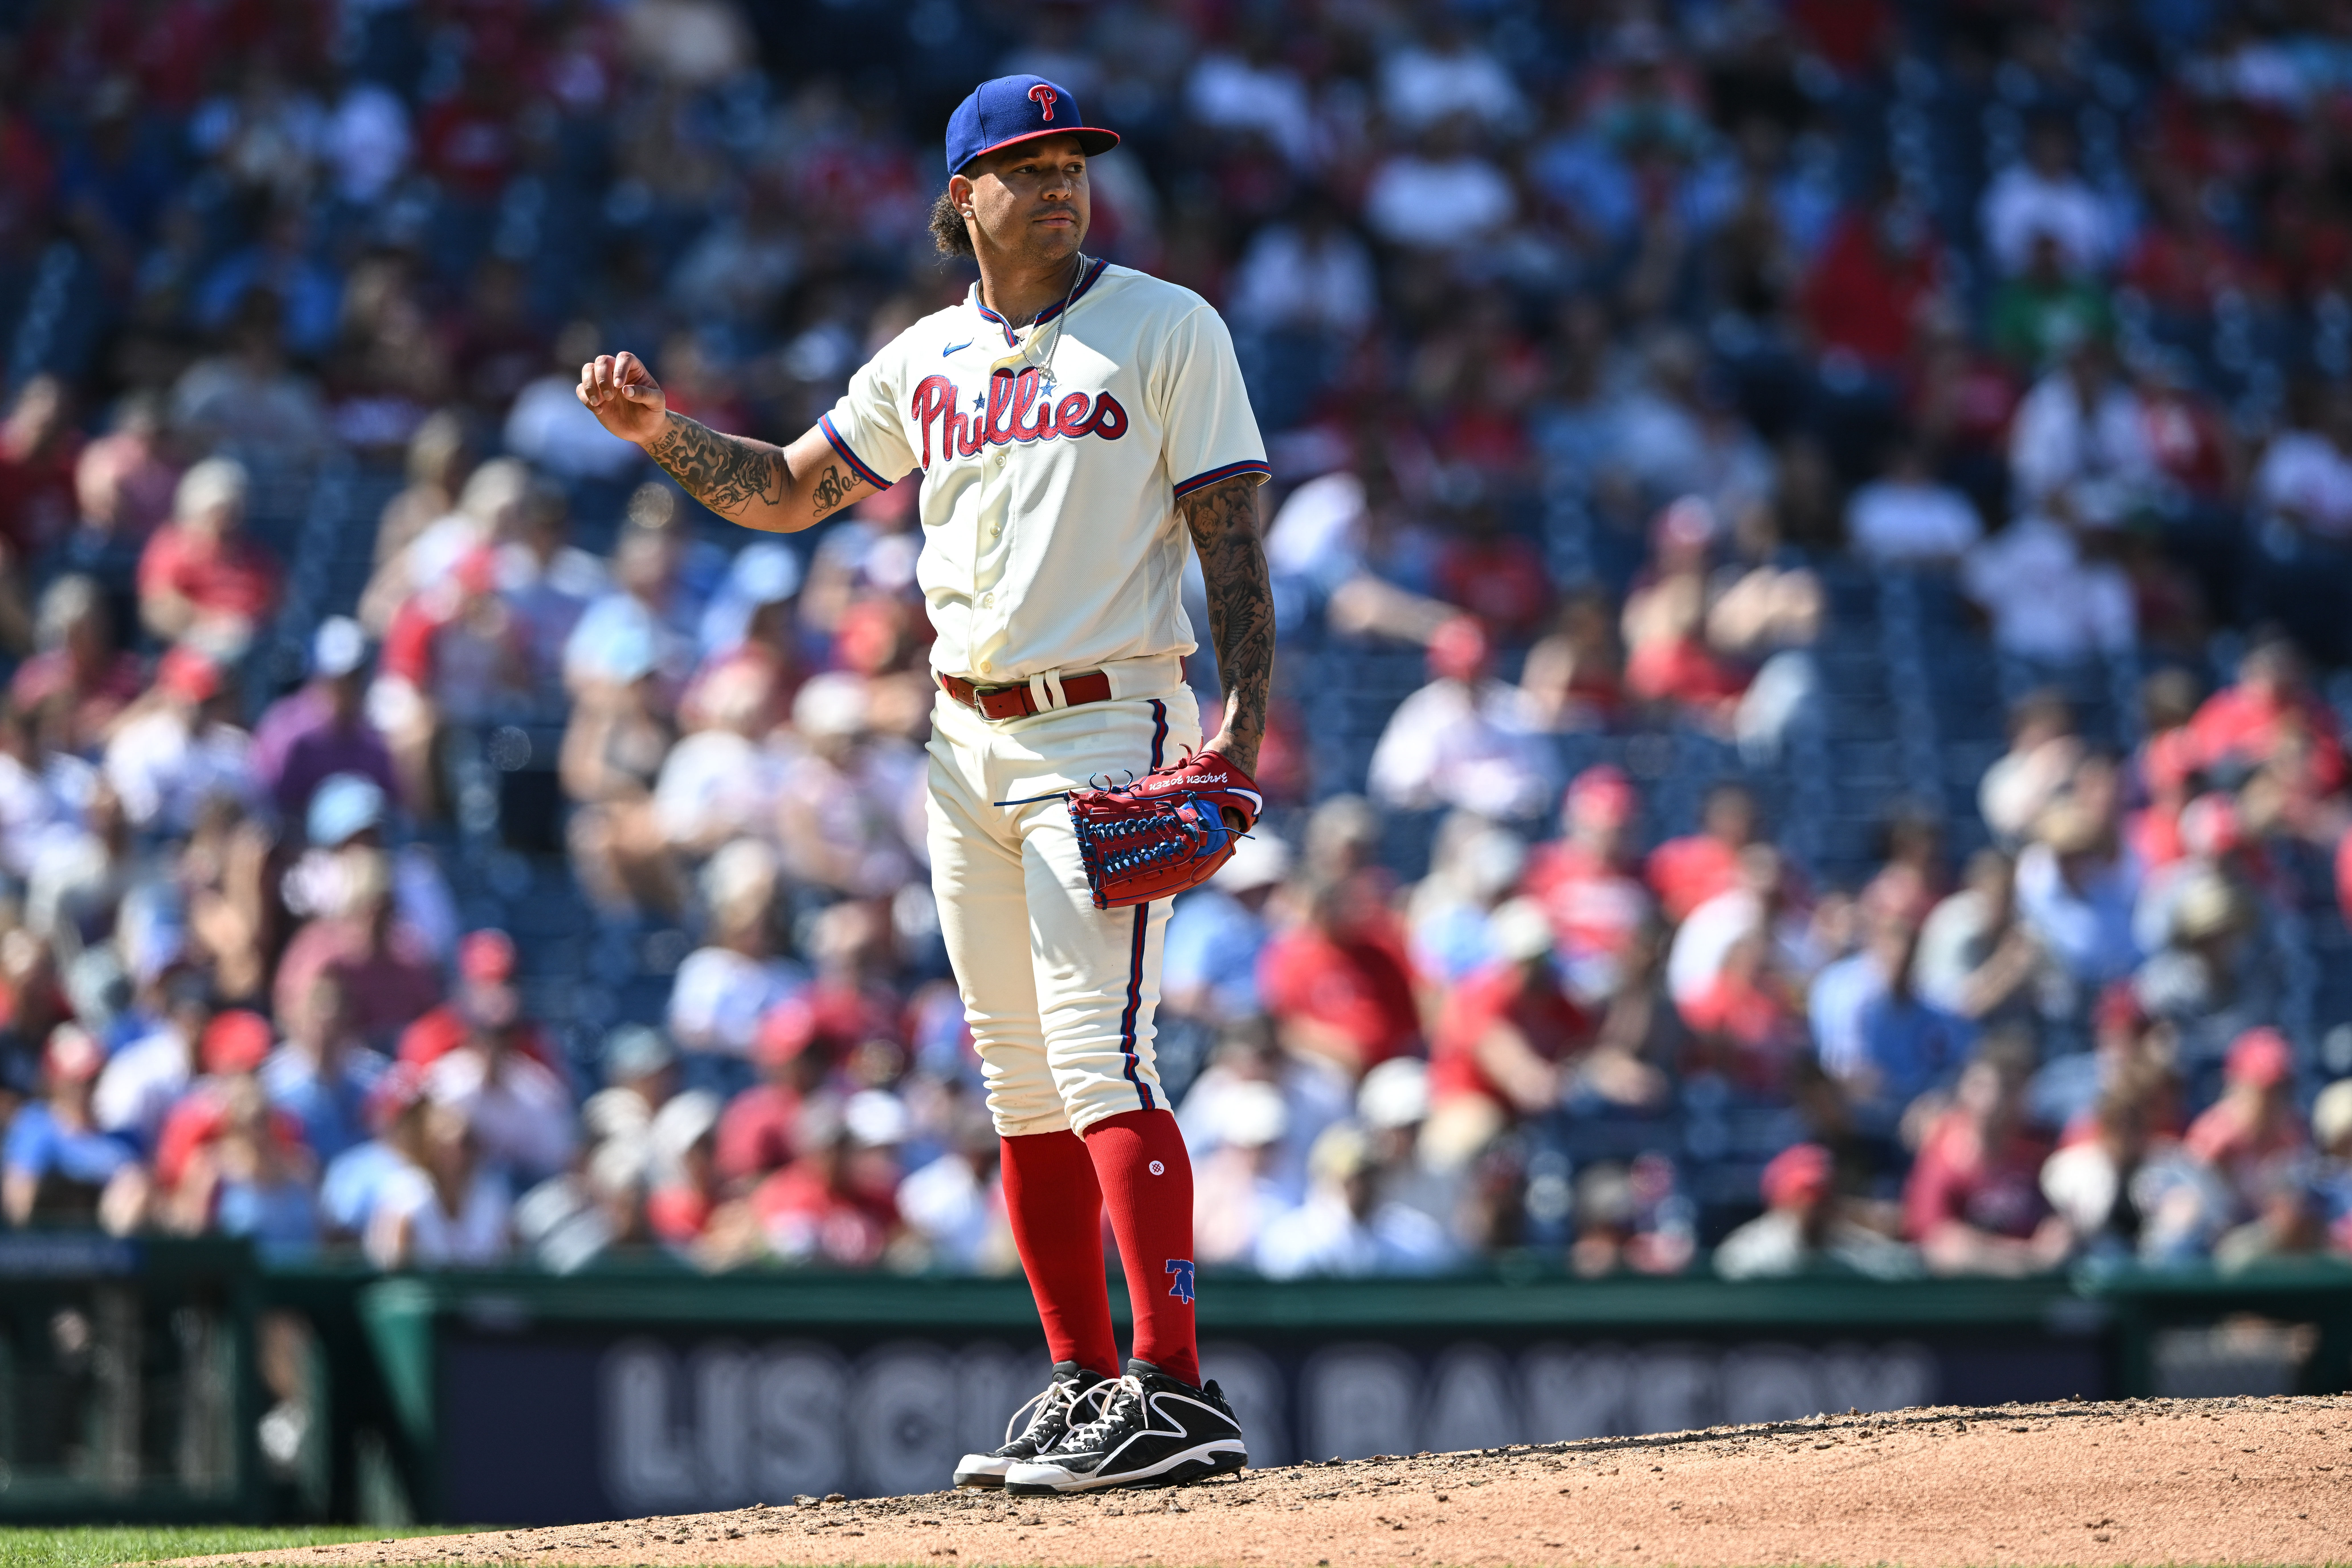 After DH split, Phillies look to trip up Braves again Reuters